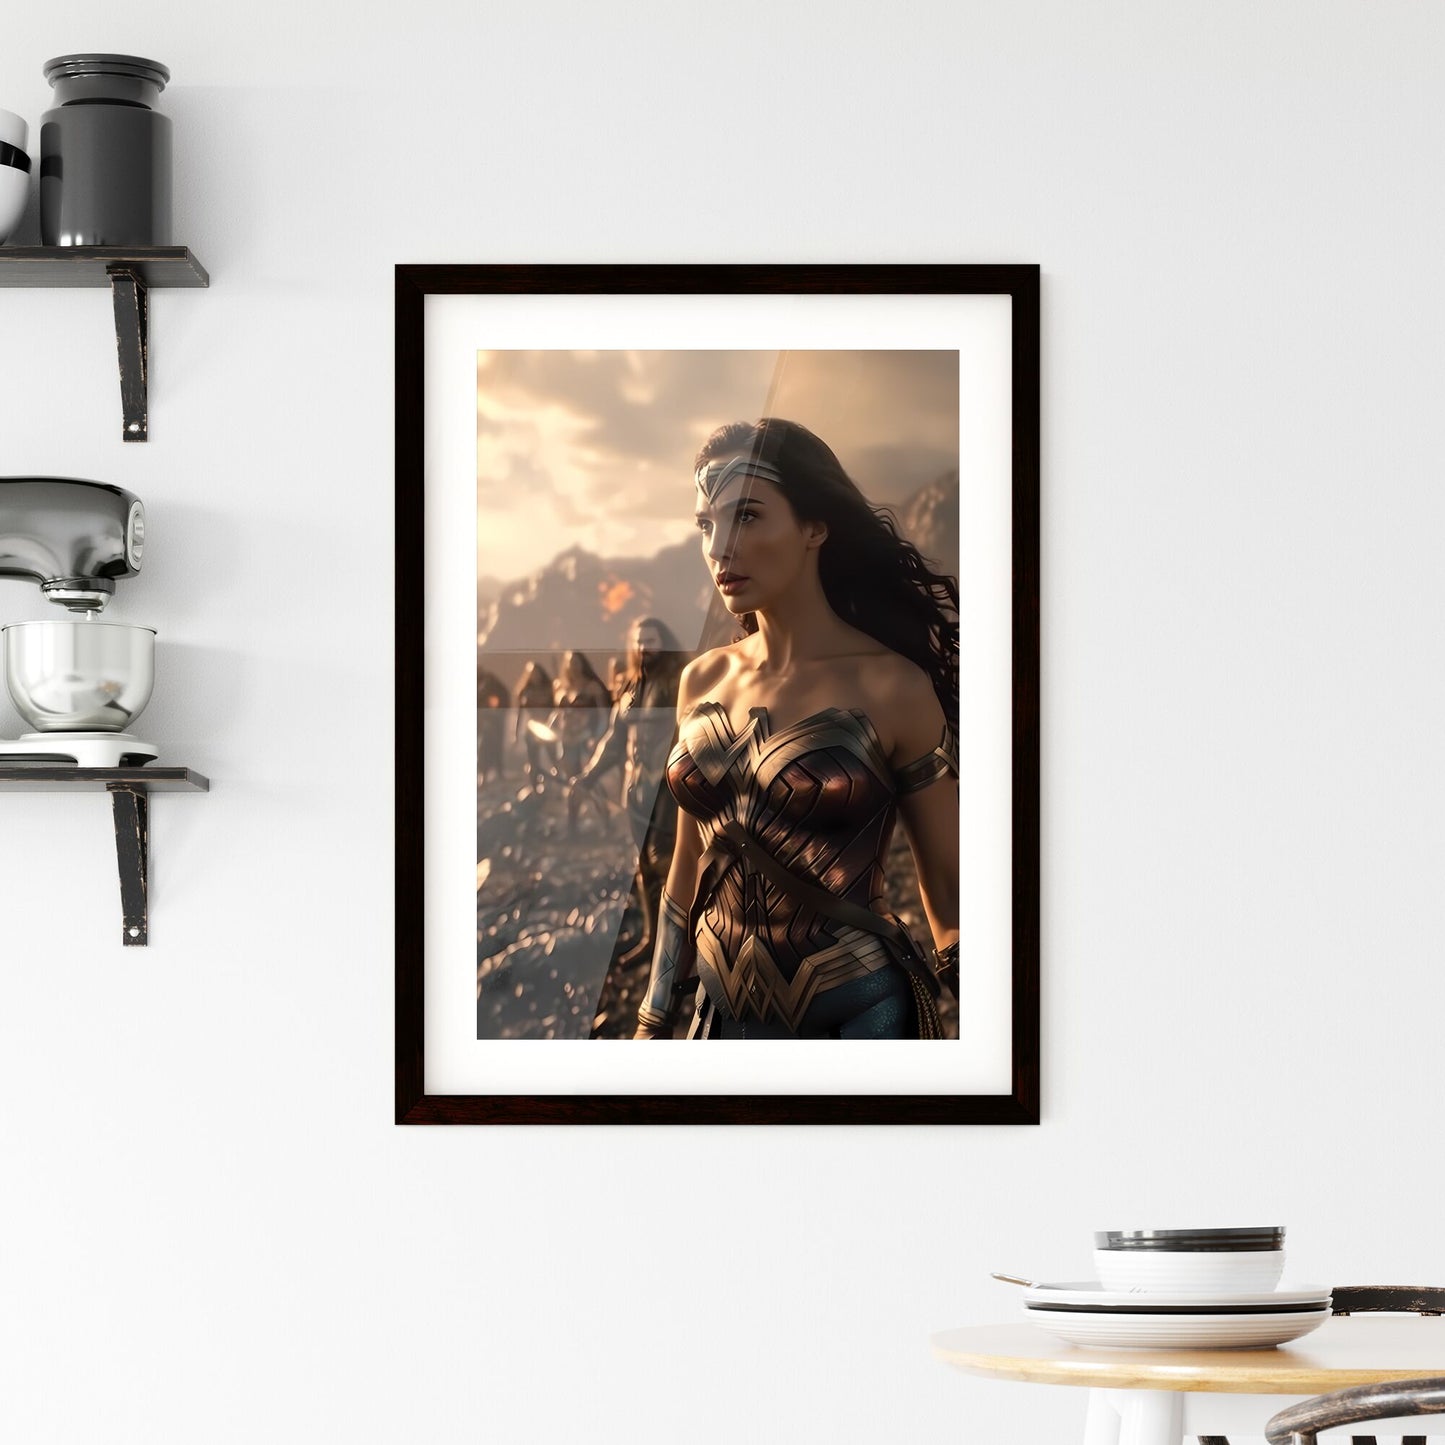 The entire JUSTICE LEAGUE standing in order of precession - Art print of a woman in a garment Default Title